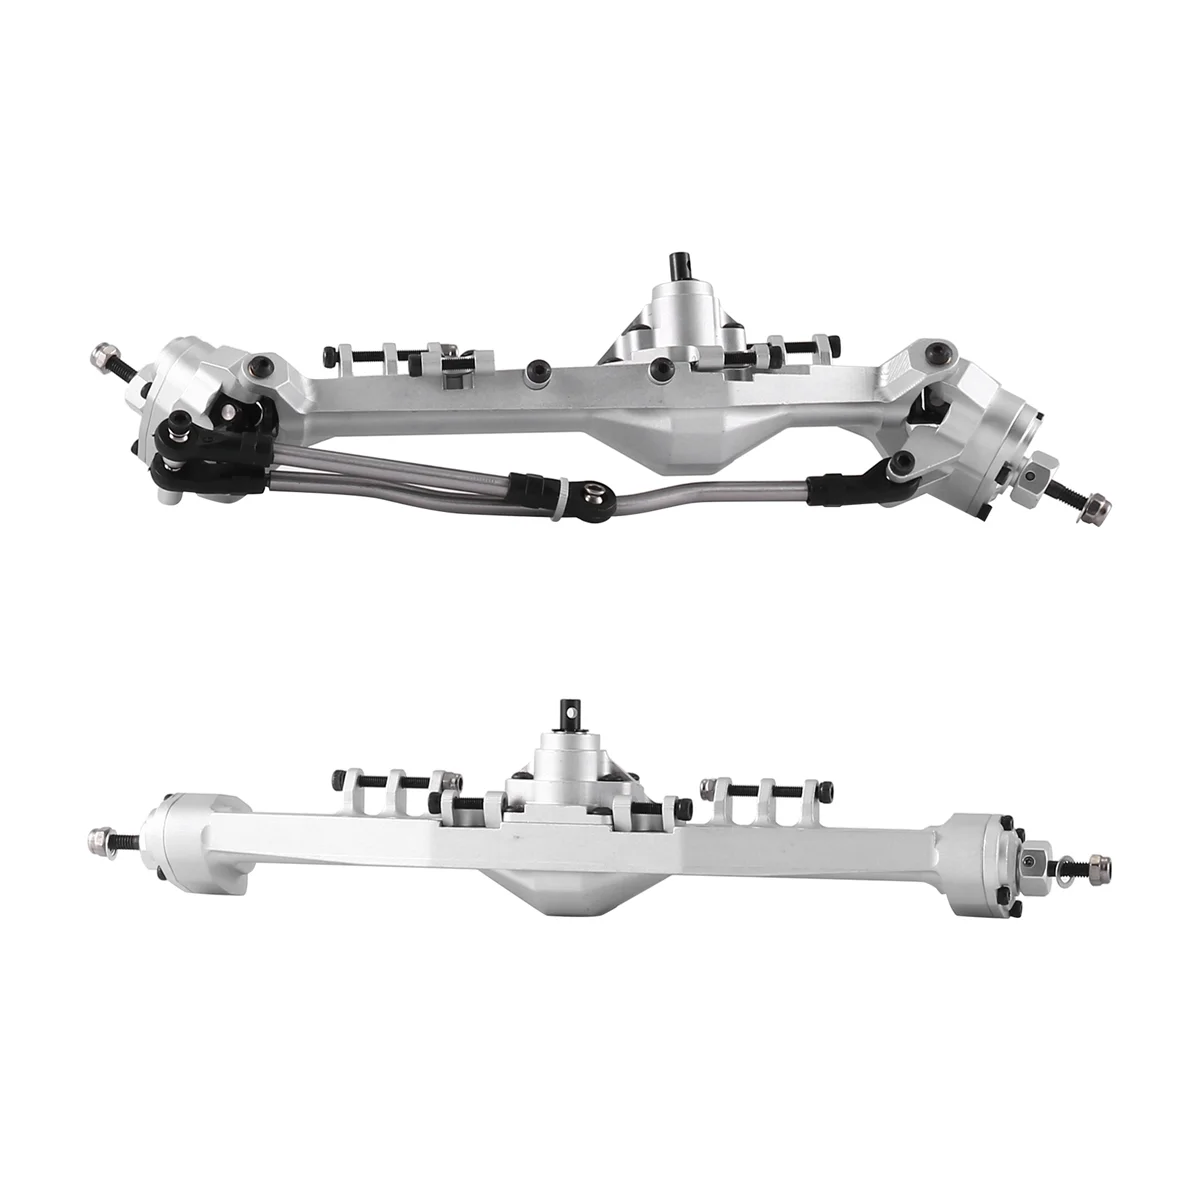 

New Metal Integrated Currie F9 Portal Axle for Axial Capra UTB10 1.9 UTB 1/10 RC Crawler Car Upgrades Parts,Silver